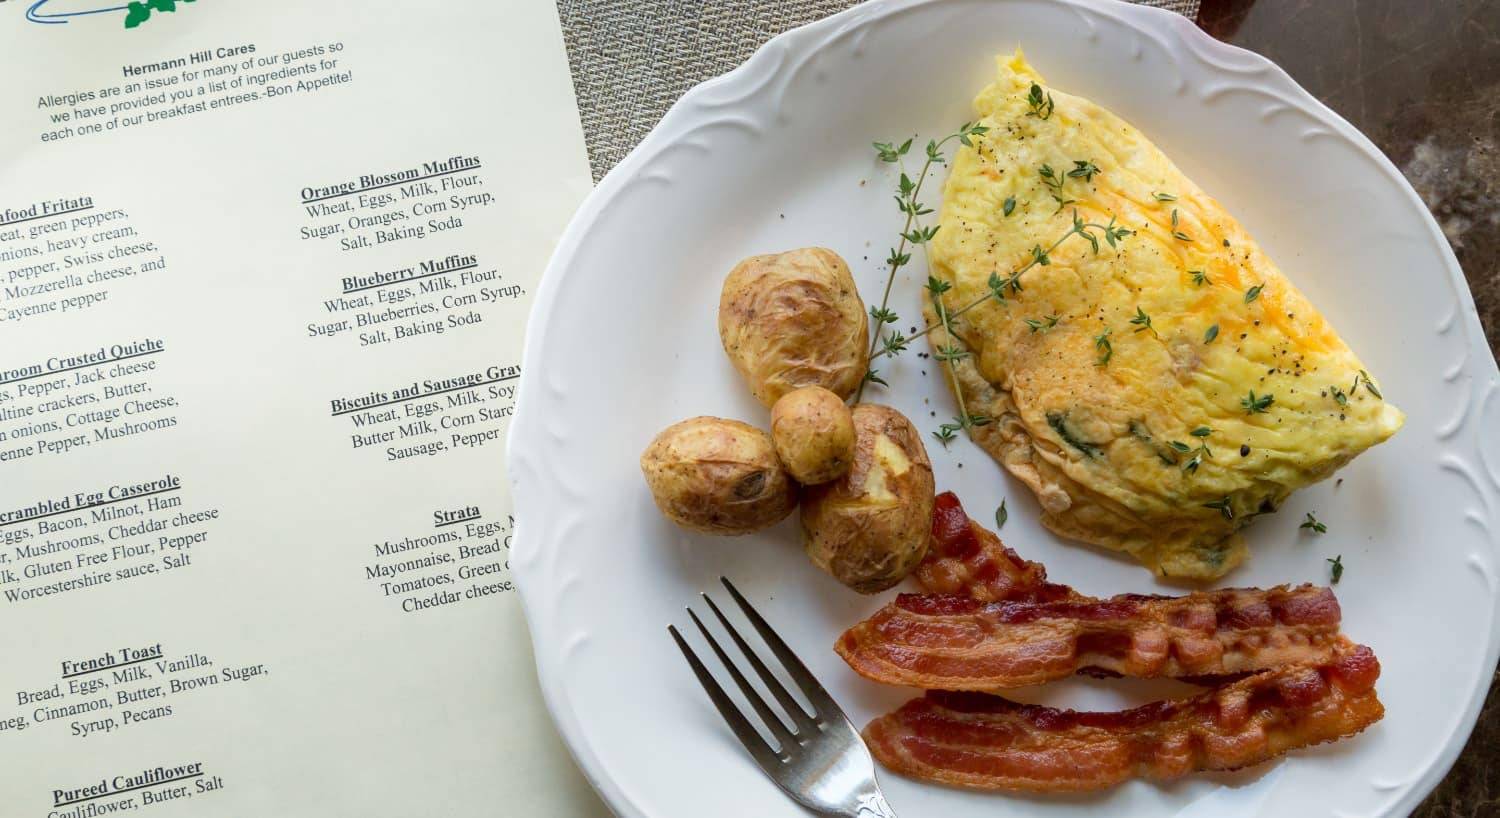 Close up view of breakfast menu and white plate with omelette, bacon, and potatoes